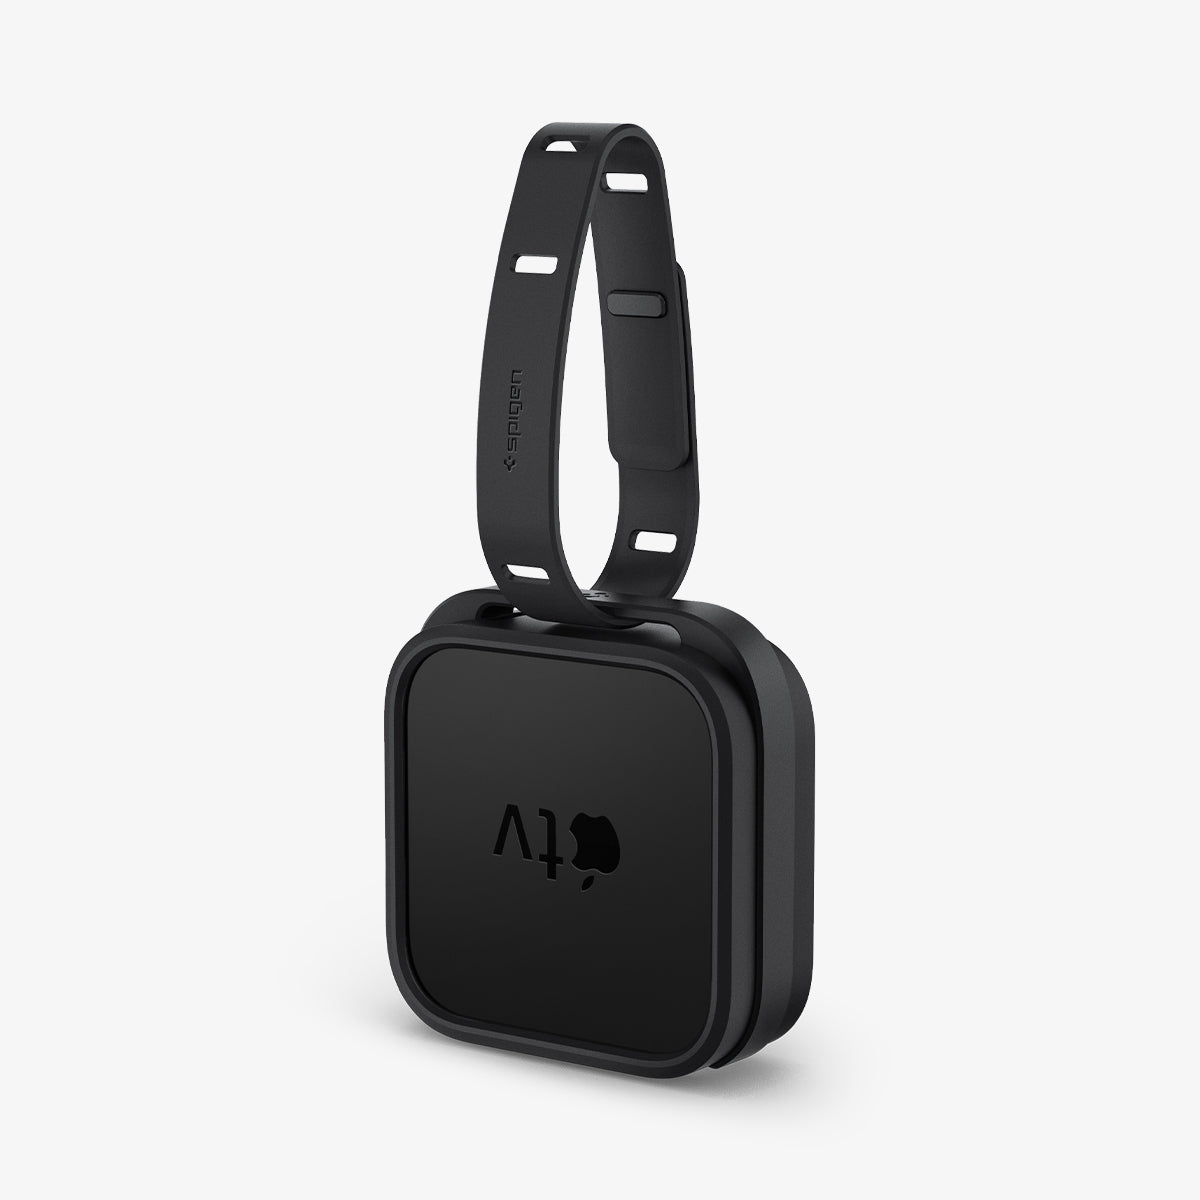 AMP03785 - Apple TV 4K Mount Silicone Fit in black showing the front and side with strap